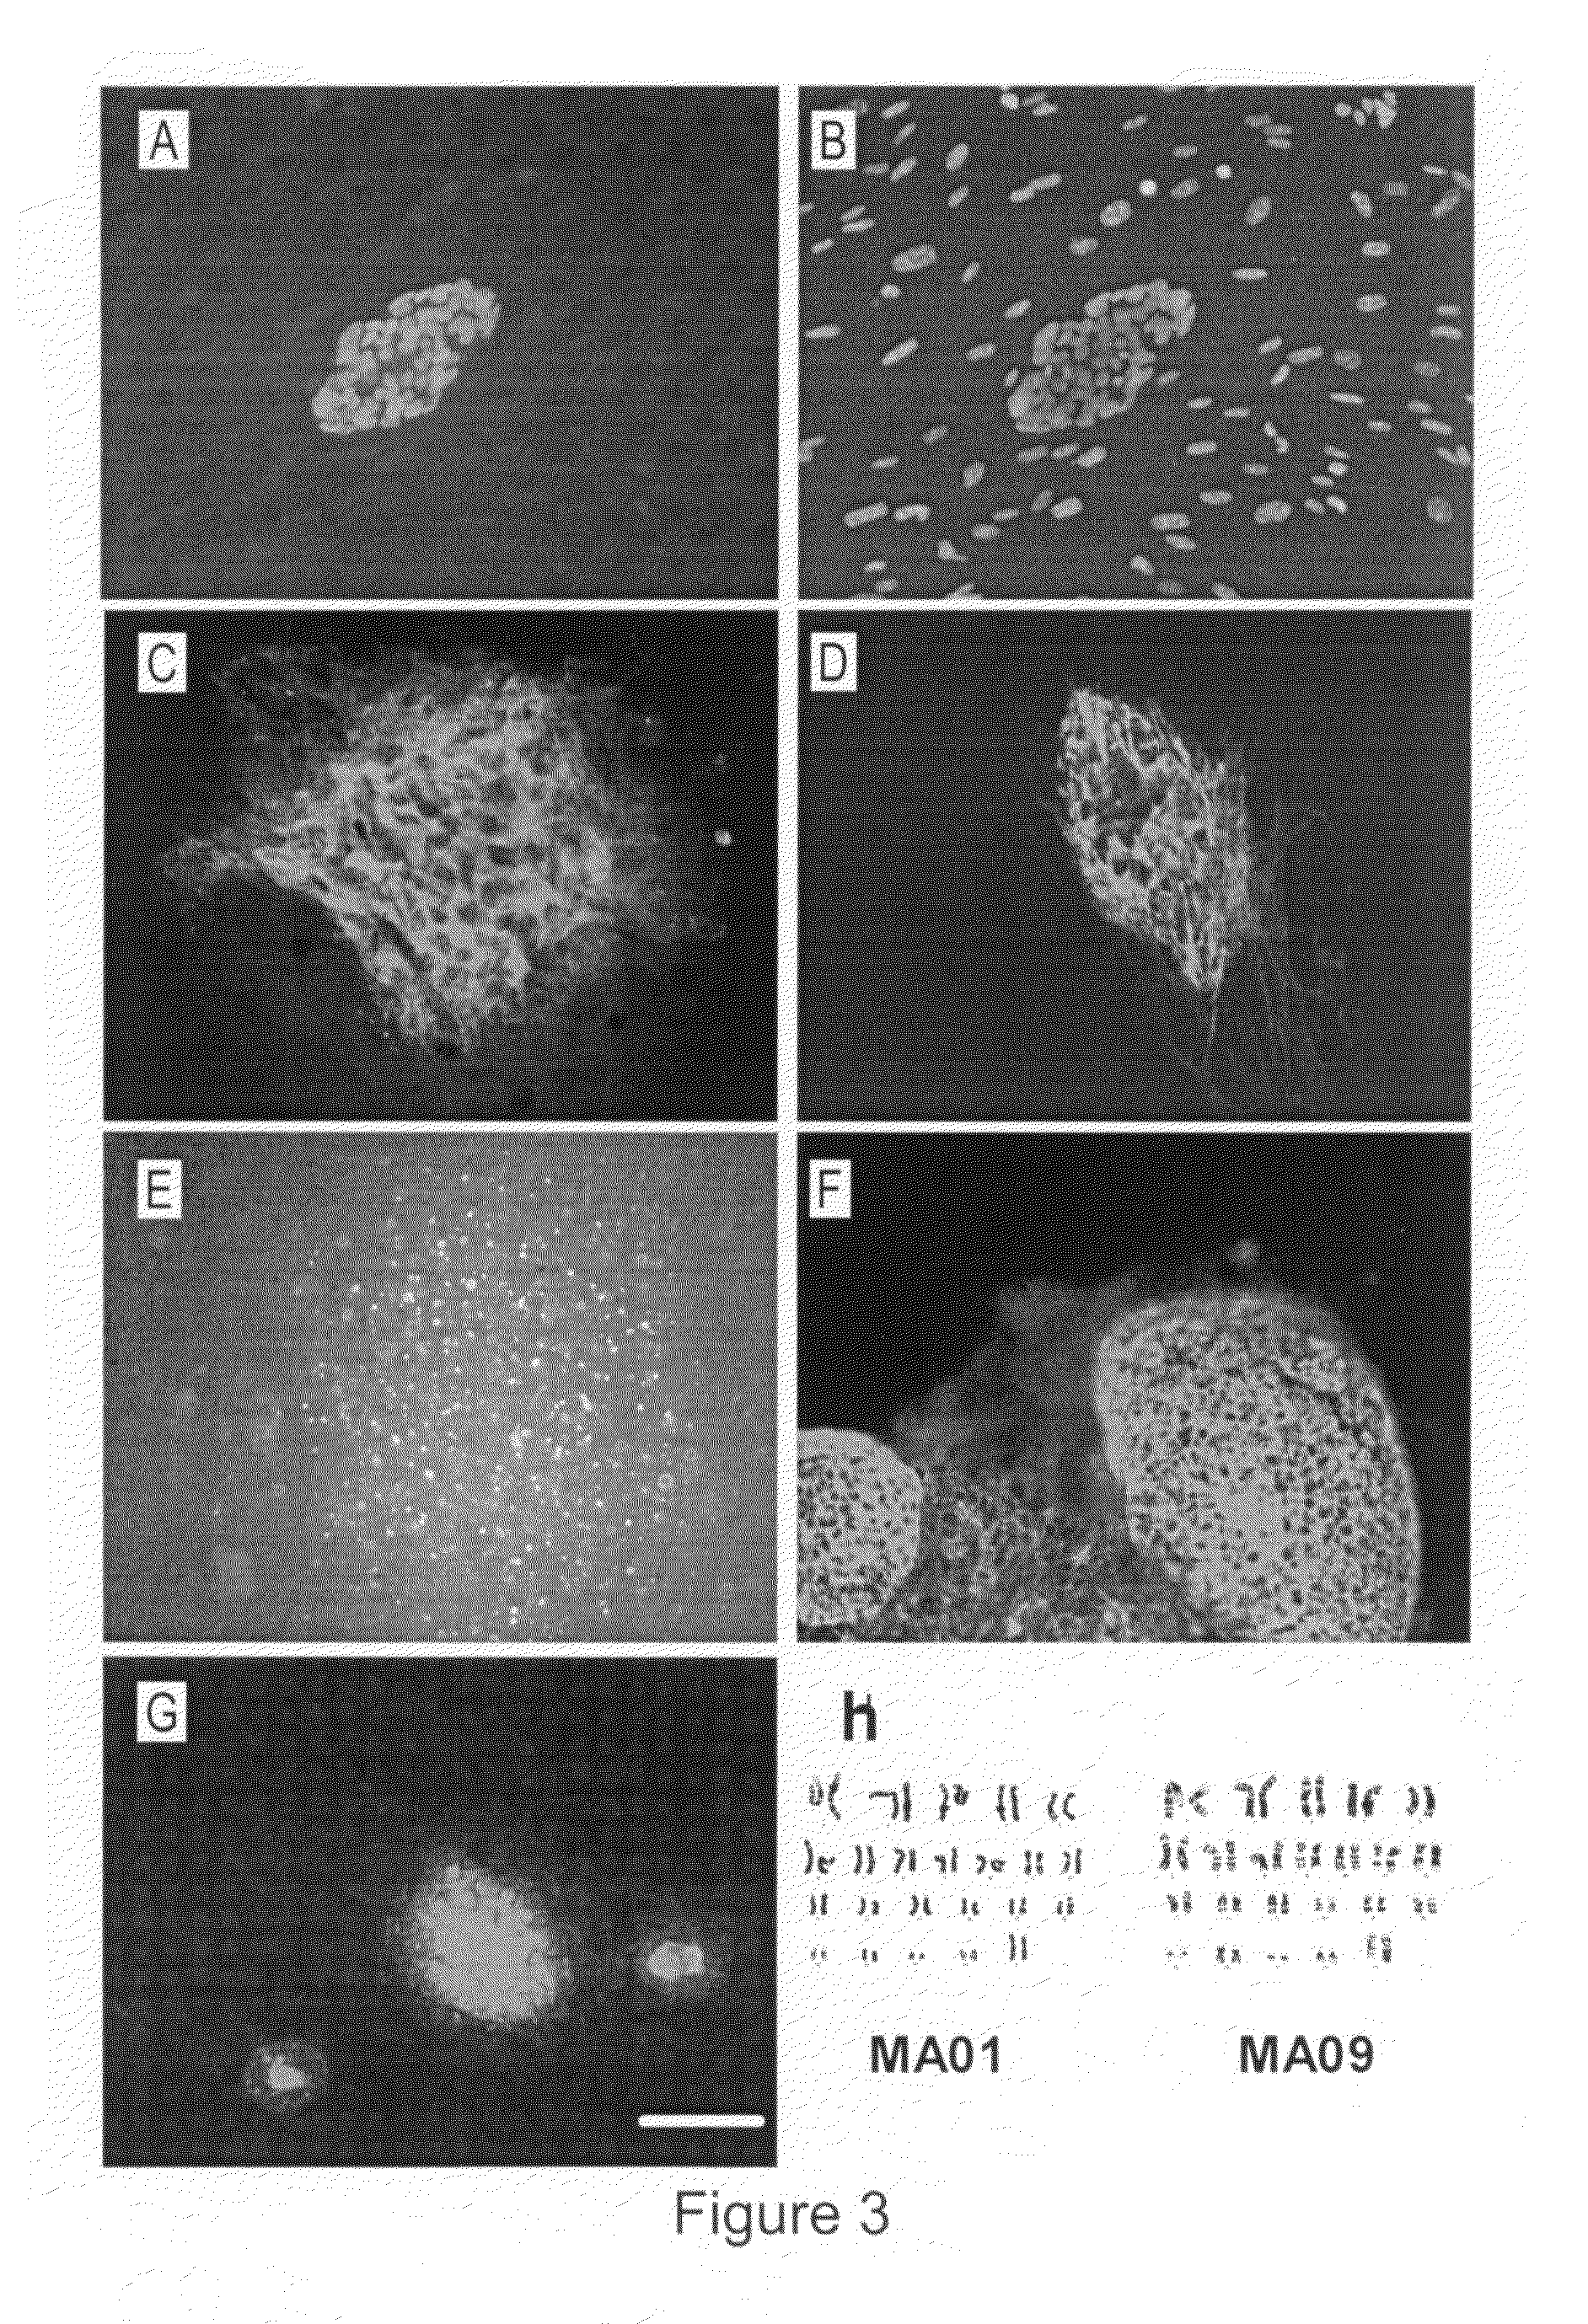 Derivation of embryonic stem cells and embryo-derived cells